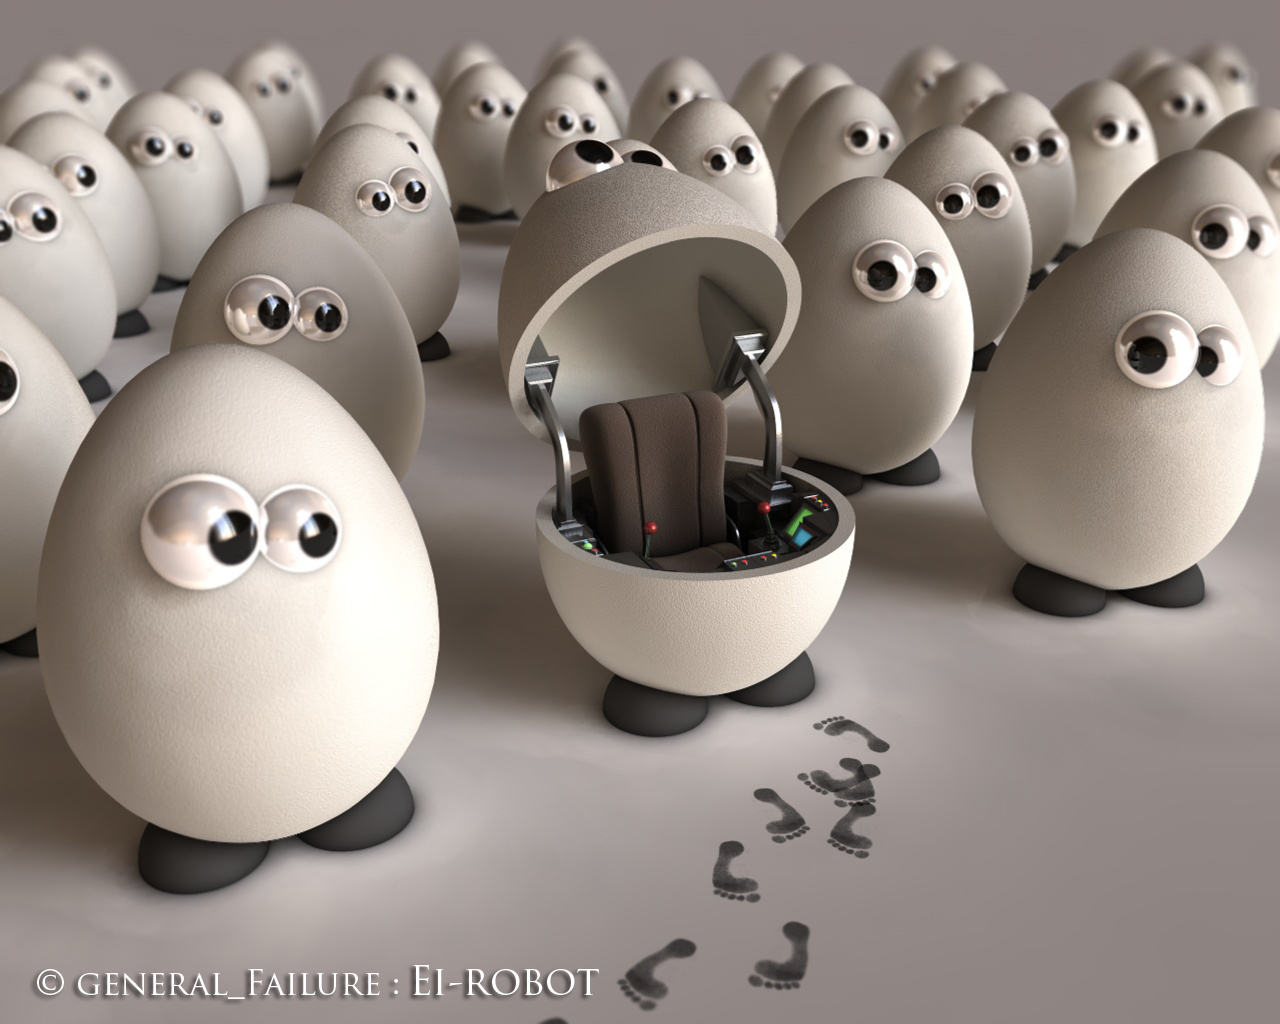 Cute Funny 3d Cartoon Wallpapers for Desktop background